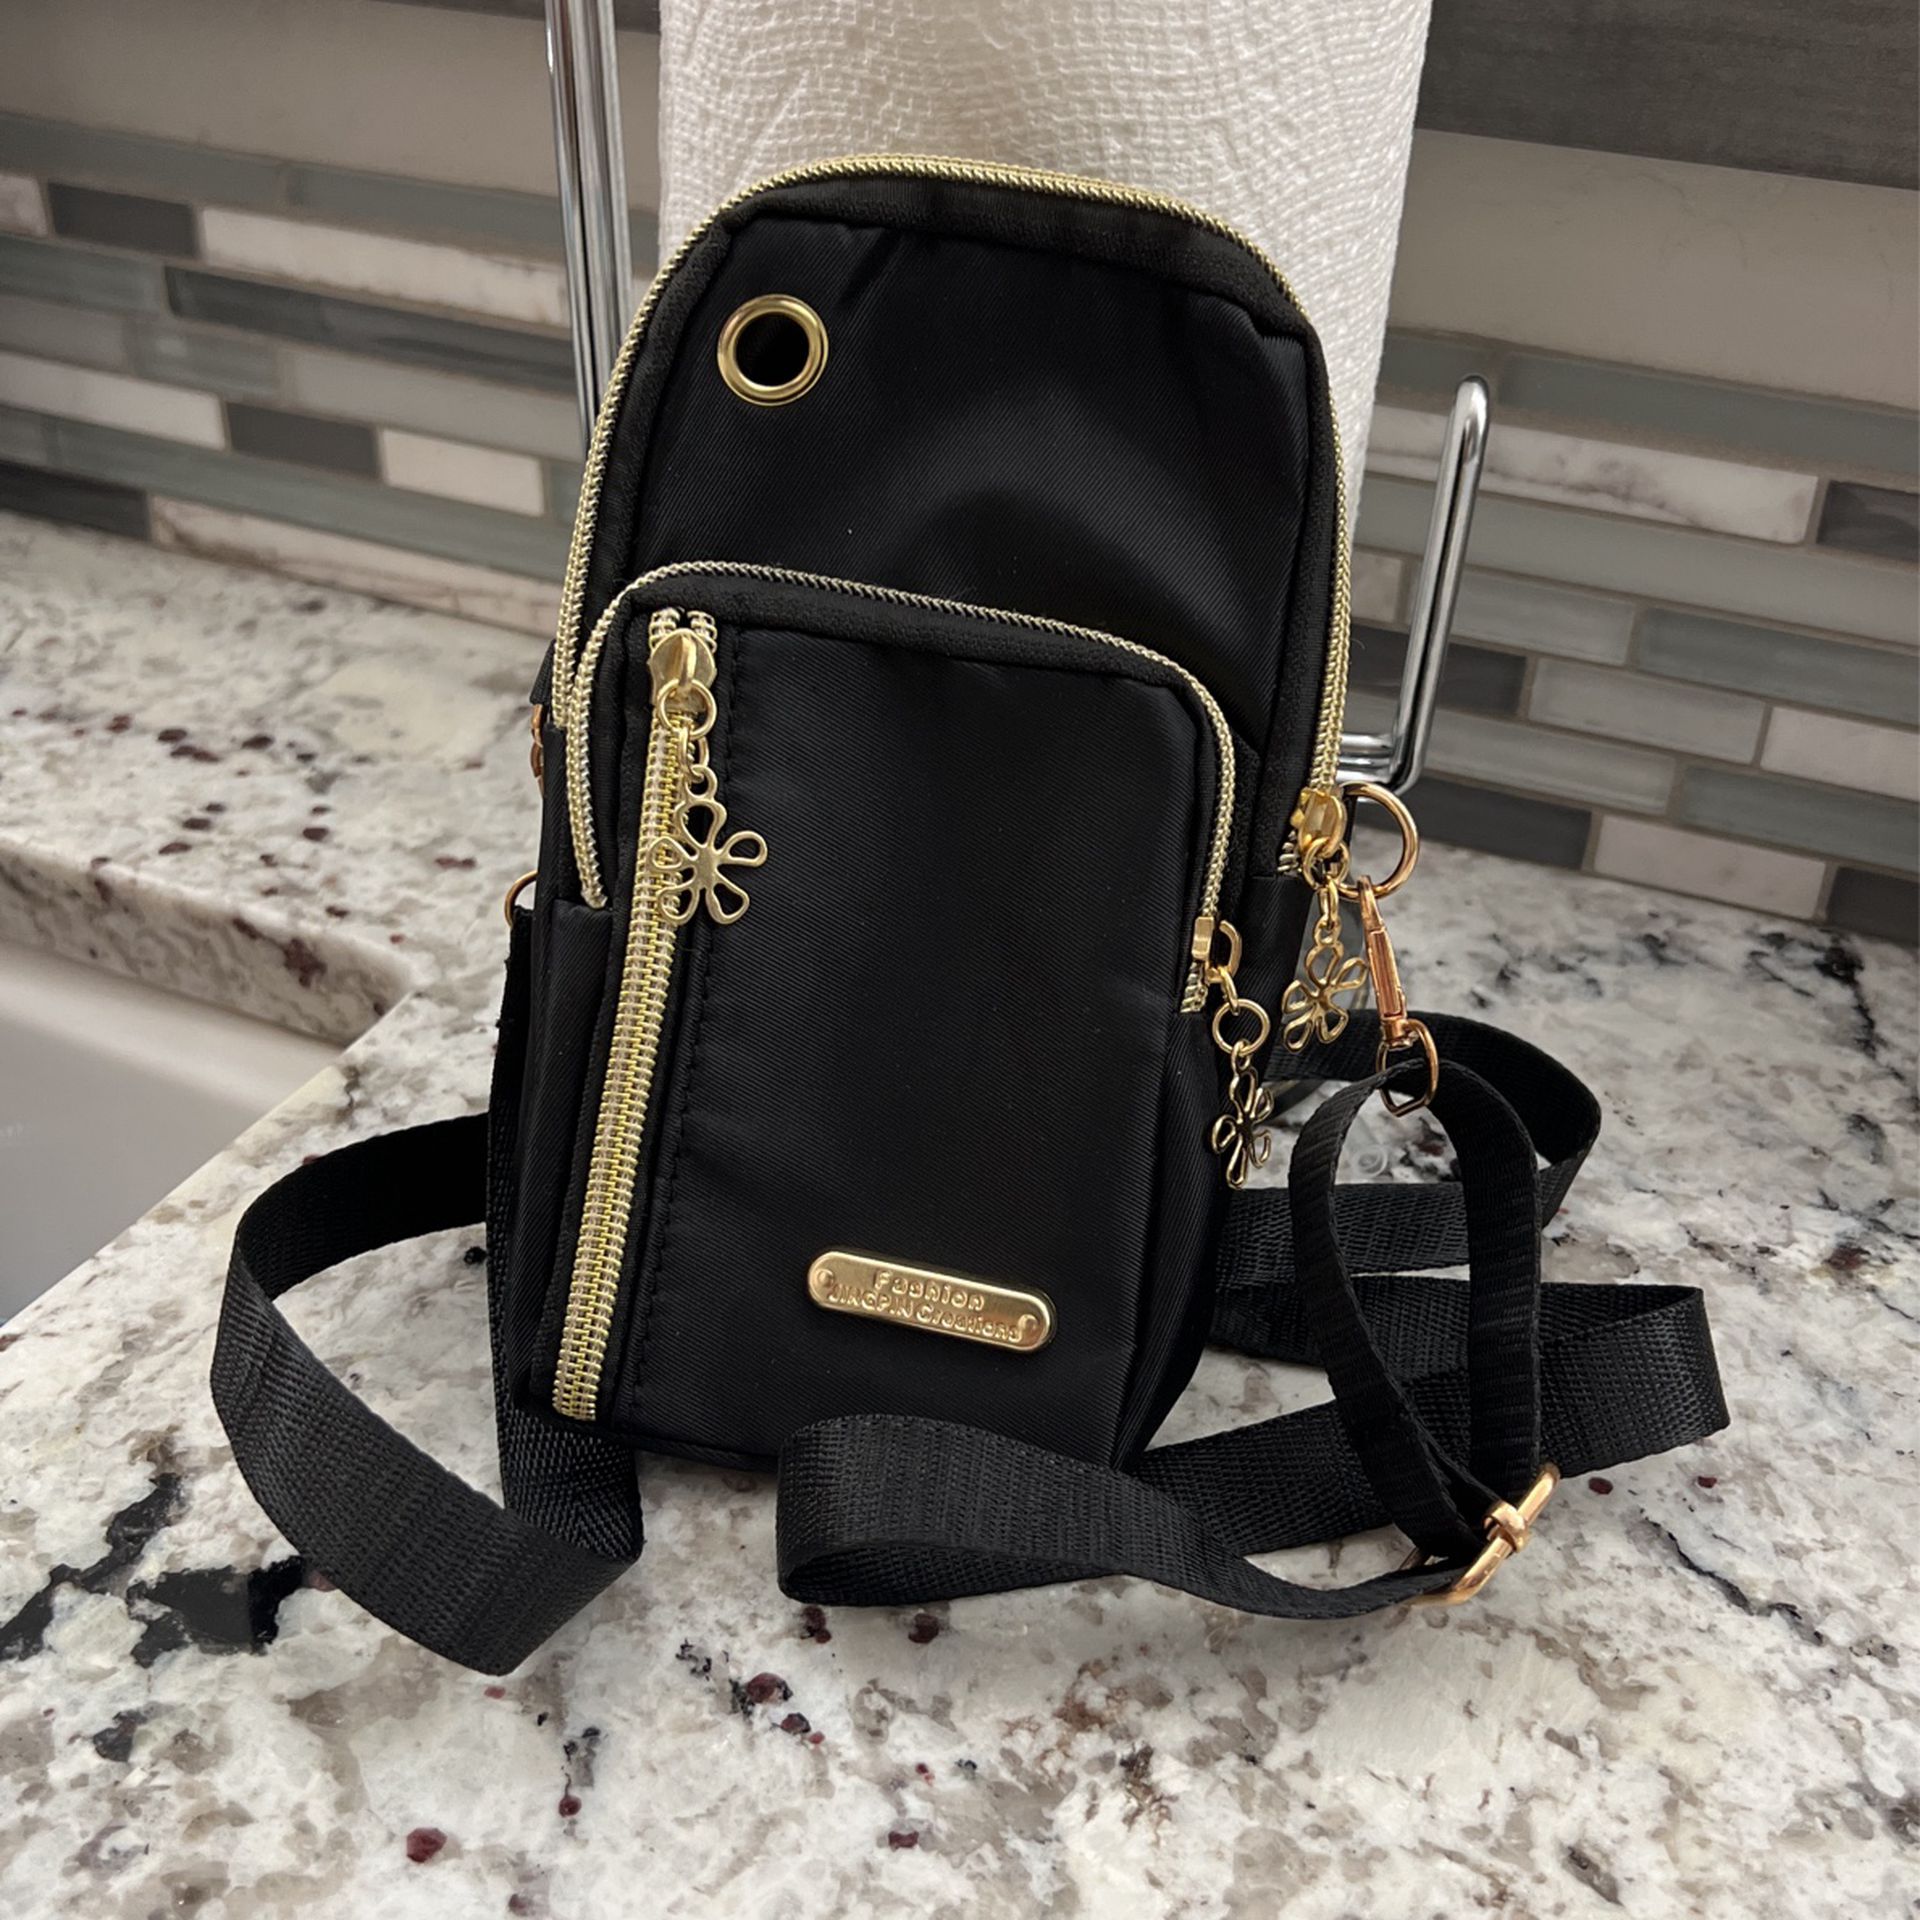 Fashion Kingpin Creations Black Crossbody With Gold Colored Details